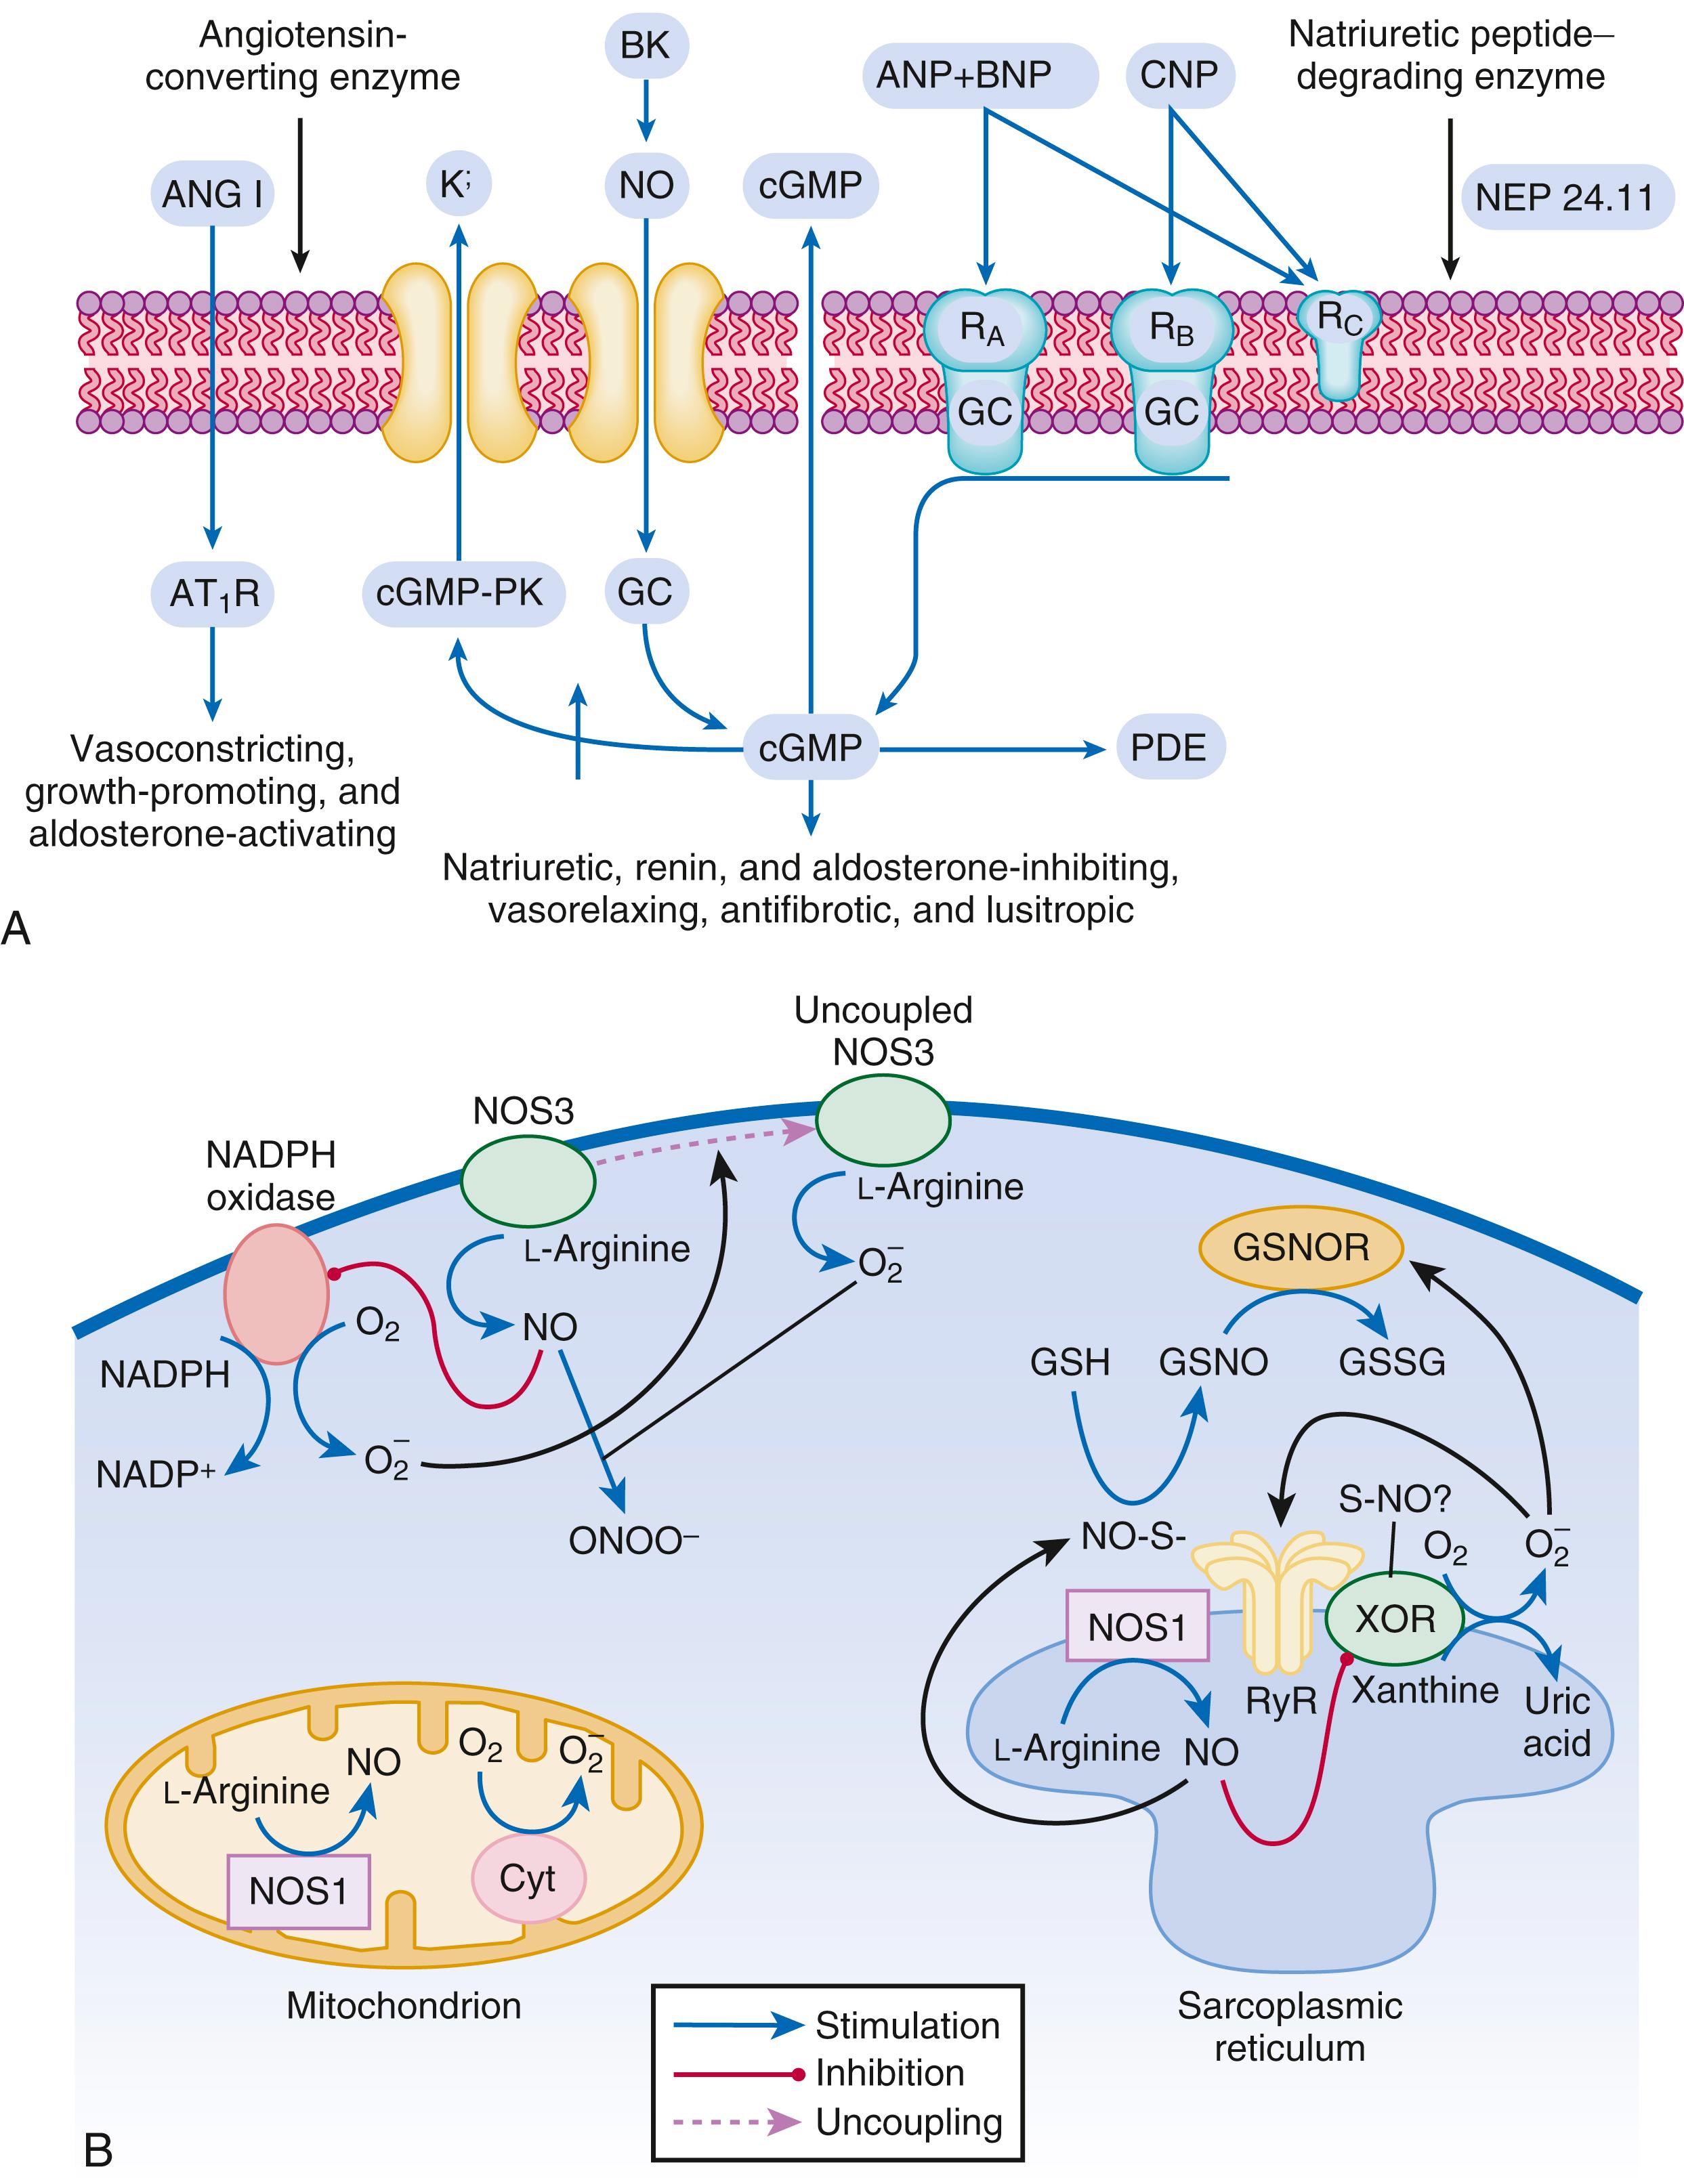 EFIGURE 47.2, A, Cellular actions in signaling of the natriuretic peptide system; ANG I, Angiotensin I; AT 1 R, angiotensin type 1 receptor; BK, bradykinin; GC, guanylate cyclase; NEP, neutral endopeptidase; PDE, phosphodiesterase; PK, protein kinase; R A , R B , and R C , particulate guanylate cyclase A, B, and C receptors. B, Interaction of oxidative and nitrosative pathways in heart failure. The principal sources of ROS in the cardiomyocyte are xanthine oxidoreductase ( XOR ), nicotinamide-adenine dinucleotide phosphate (NADPH) oxidase, and the mitochondria. Nitric oxide (NO) is produced by nNOS1, situated in the sarcoplasmic reticulum and in the mitochondria, and by endothelial-constitutive NOS (eNOS) (situated in the caveolae in the cell membrane). XOR and NOS1 colocalize in the SR, and this allows the inhibition of XOR by NOS1, possibly through S -nitrosylation. In turn, XOR reduces S -nitrosoglutathione ( GSNO ), leading to the regeneration of glutathione ( GSH ), the enzyme that reduces SNO moieties in proteins and preserves the S -nitrosylation equilibrium. In SR, NOS1 regulates the activity of the ryanodine receptor ( RyR ) through S-nitrosylation; by contrast, XOR-generated superoxide (O 2 - ) irreversibly activates RyR, precluding this regulatory action of NO. In the cell membrane, NOS3 suppresses NADPH activity, whereas NADPH-produced O 2 - can induce NOS3 uncoupling resulting in O 2 - production and reduced NO synthesis. O 2 - interacts with NO and generates peroxynitrite (ONOO - ). Cyt , Cytochrome; GSSG , oxidized GSH; GSNOR , GSNO reductase.